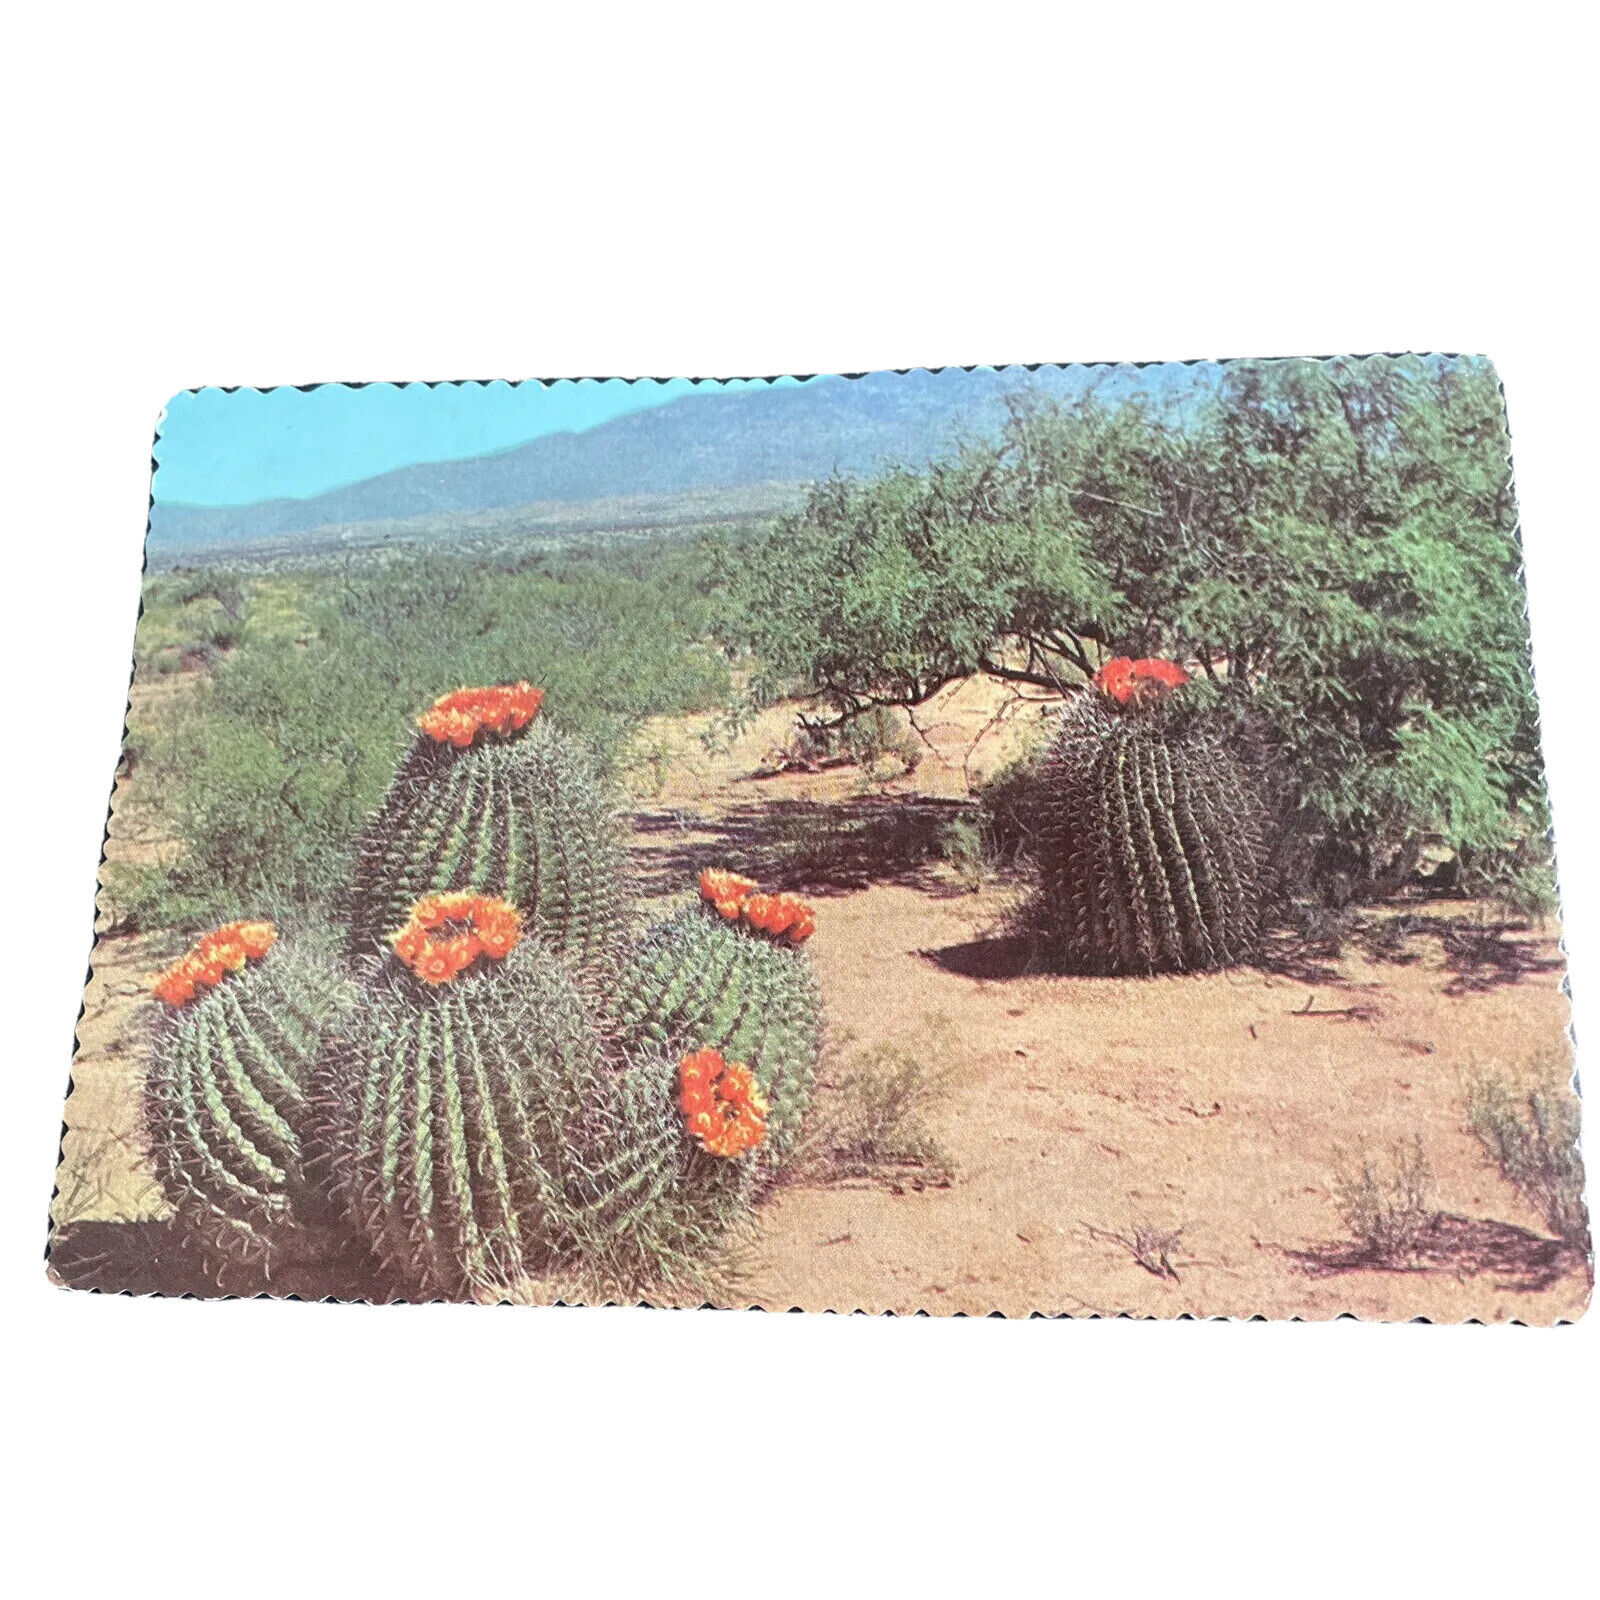 Barrel Cactus Scenic Desert Petly Old Card View Vintage